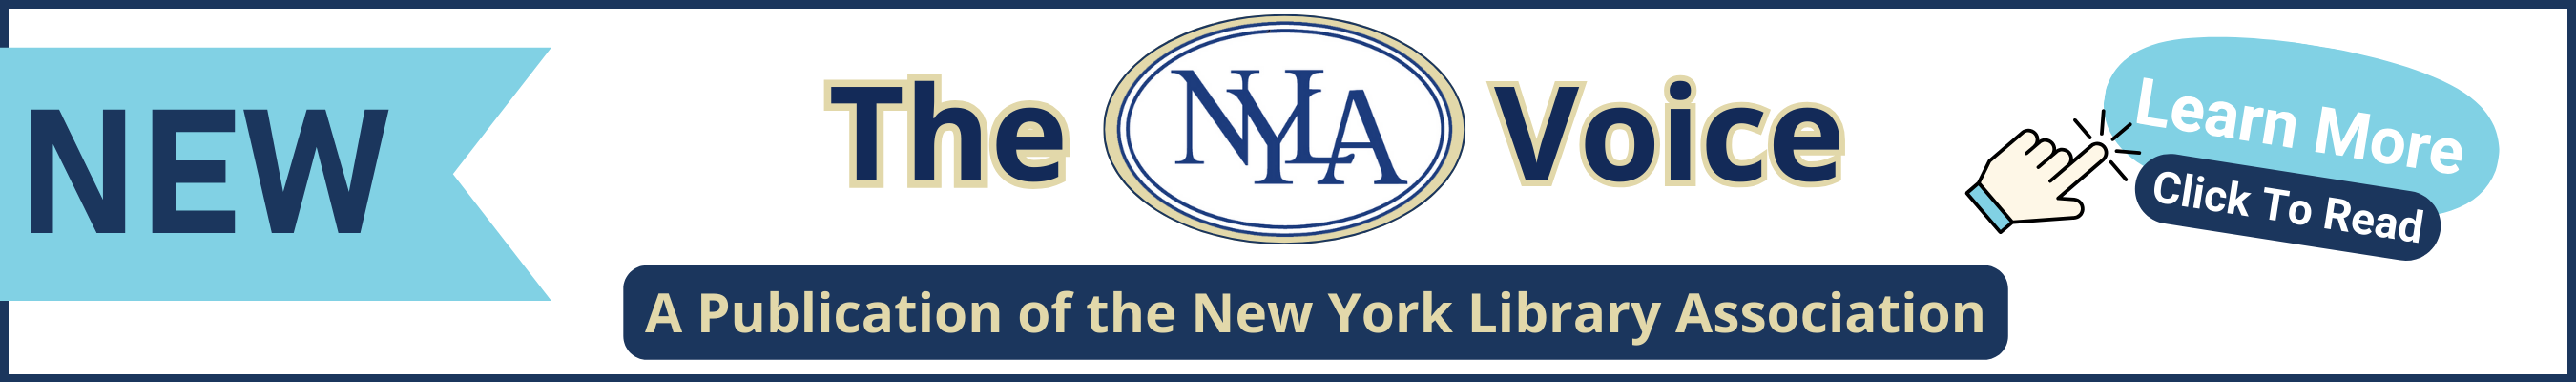 New The NYLA Voice - A Publication of the New York Library Association - Click to Read